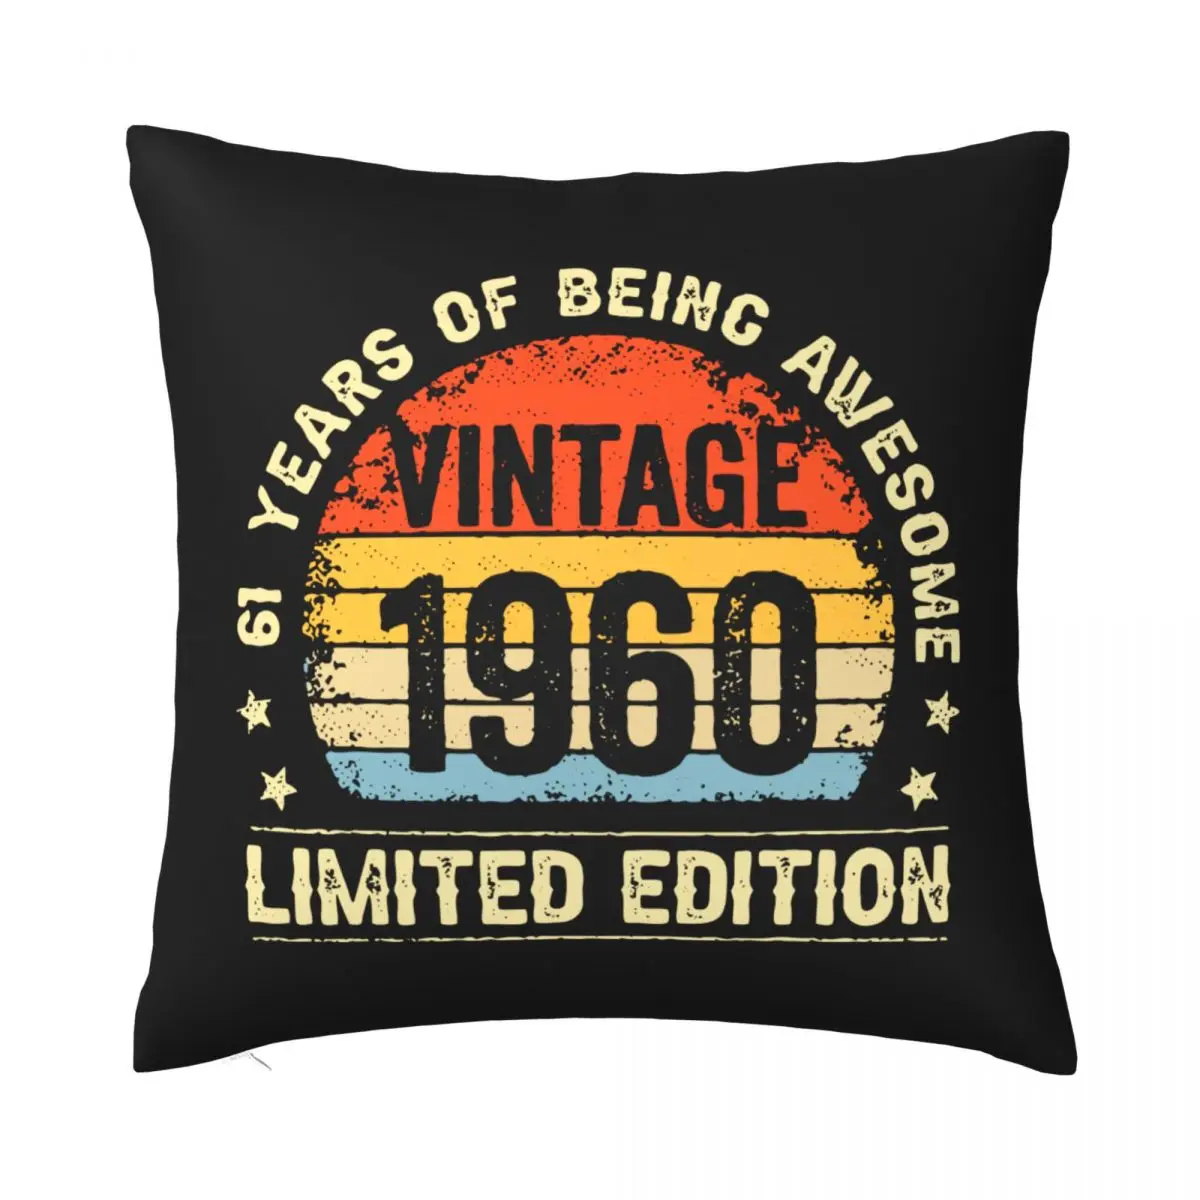 

Vintage 1960 Limited Edition Pillowcase Cushion Cover Decorative Born In 1960 Throw Pillow Case Cover Car Drop Shipping 18"